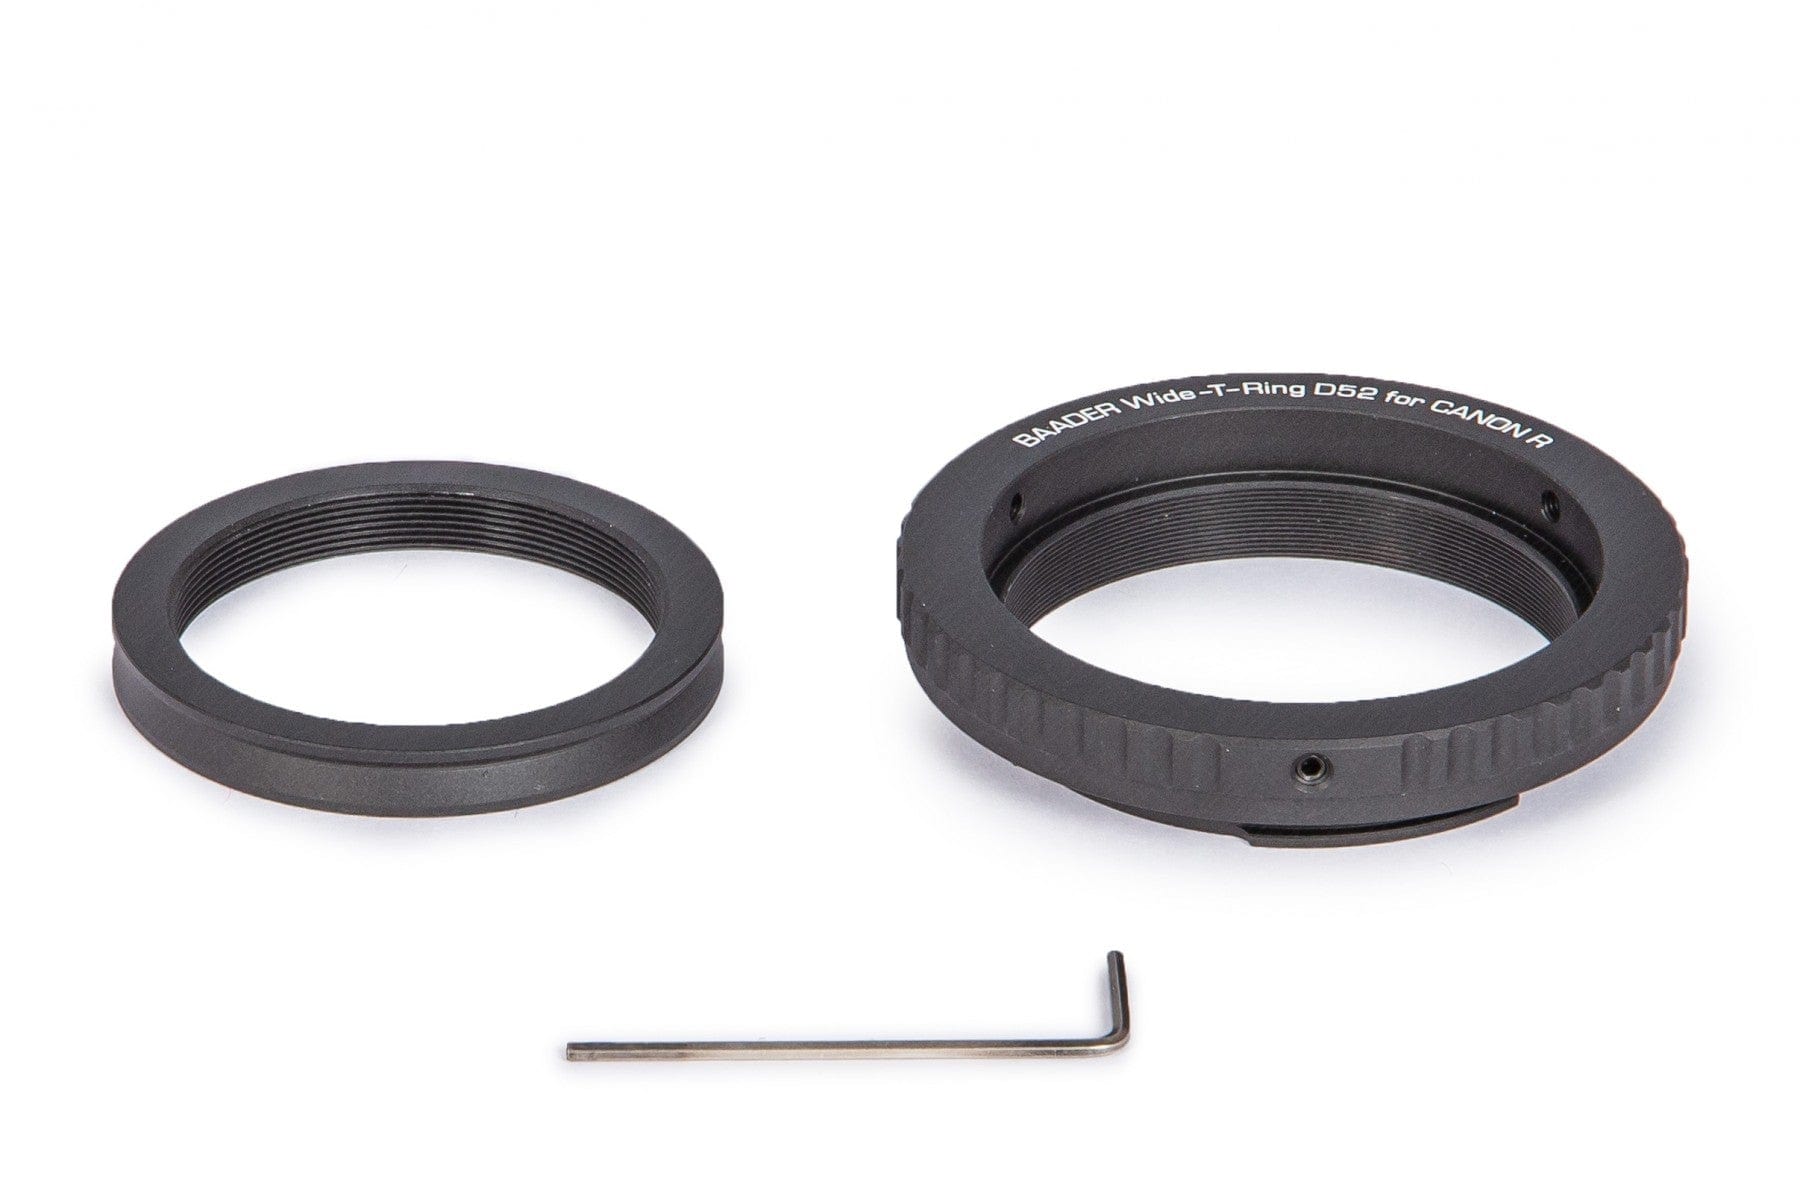 Baader Planetarium Accessory Baader Wide T-Ring Canon R (for Canon R bayonet) with D52i to T-2 and S52 - 2408336